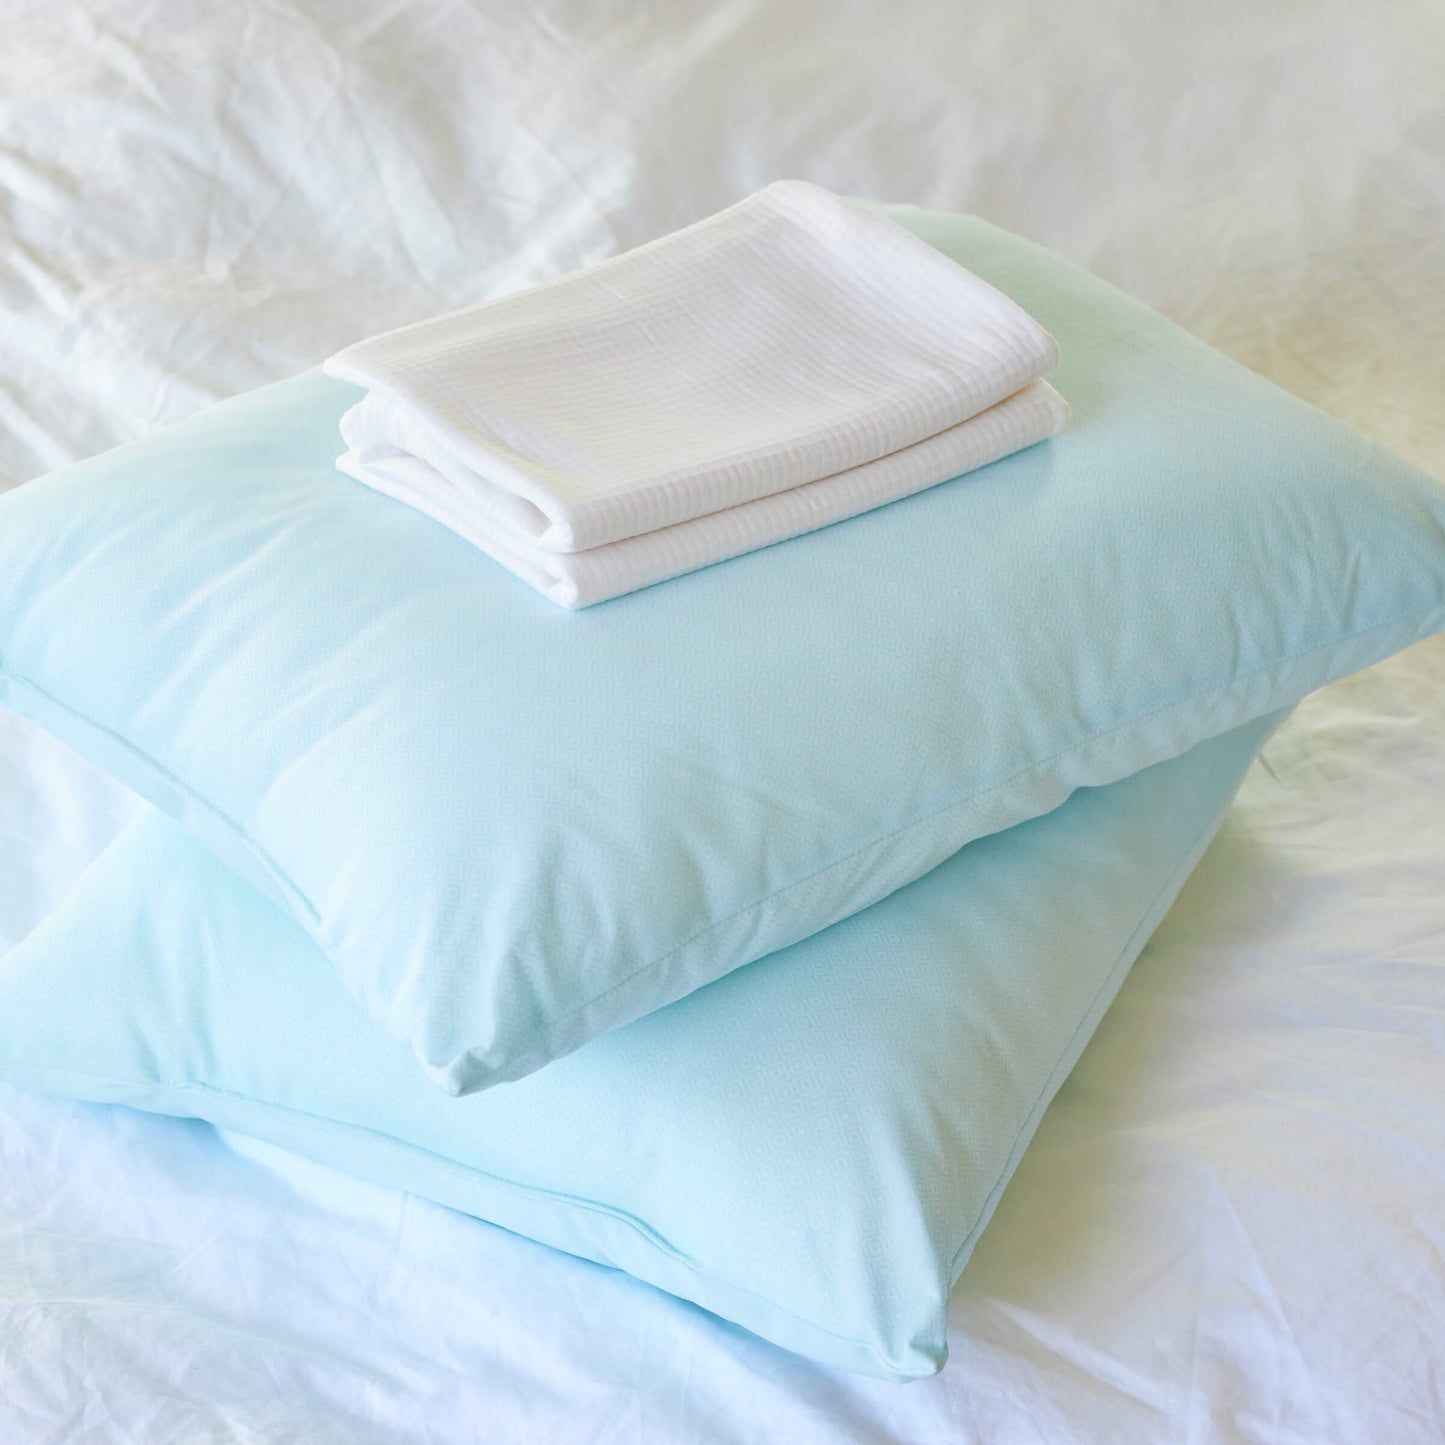 The Slumber Cloud Performance Pillow Bundle, consisting of two UltraCool Pillows and a set of Performance Pillow Covers all made with Outlast Temperature regulation technology